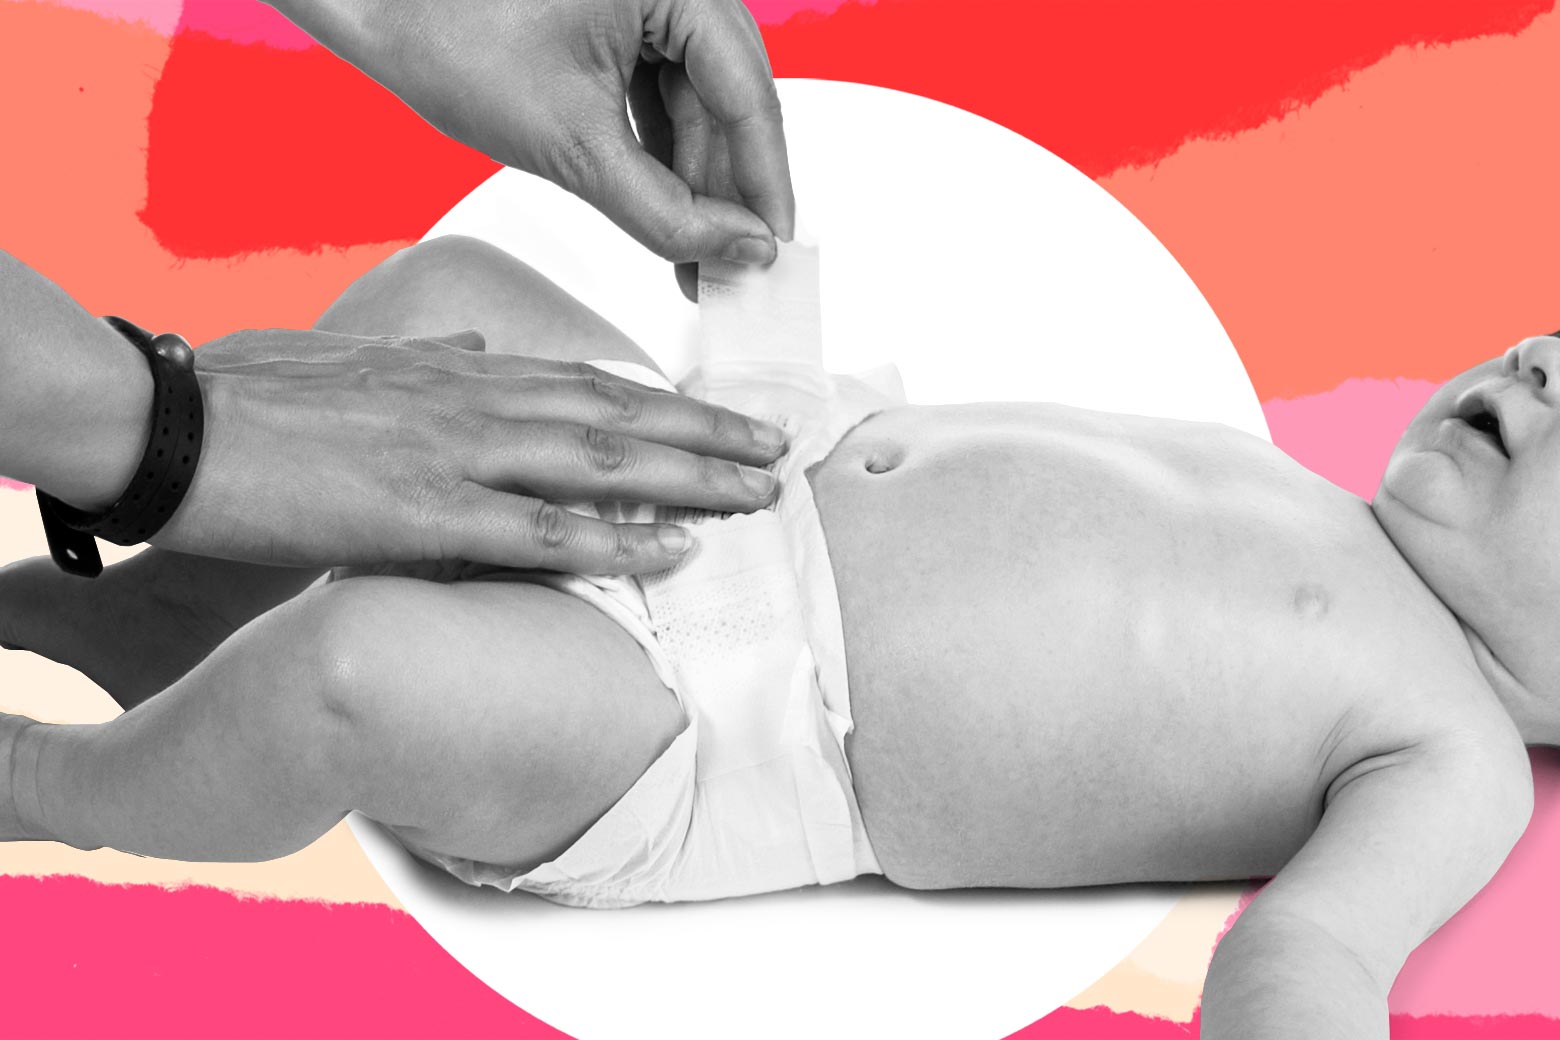 Photo illustration of a woman changing a baby's diaper on top of a pattern of torn paper.